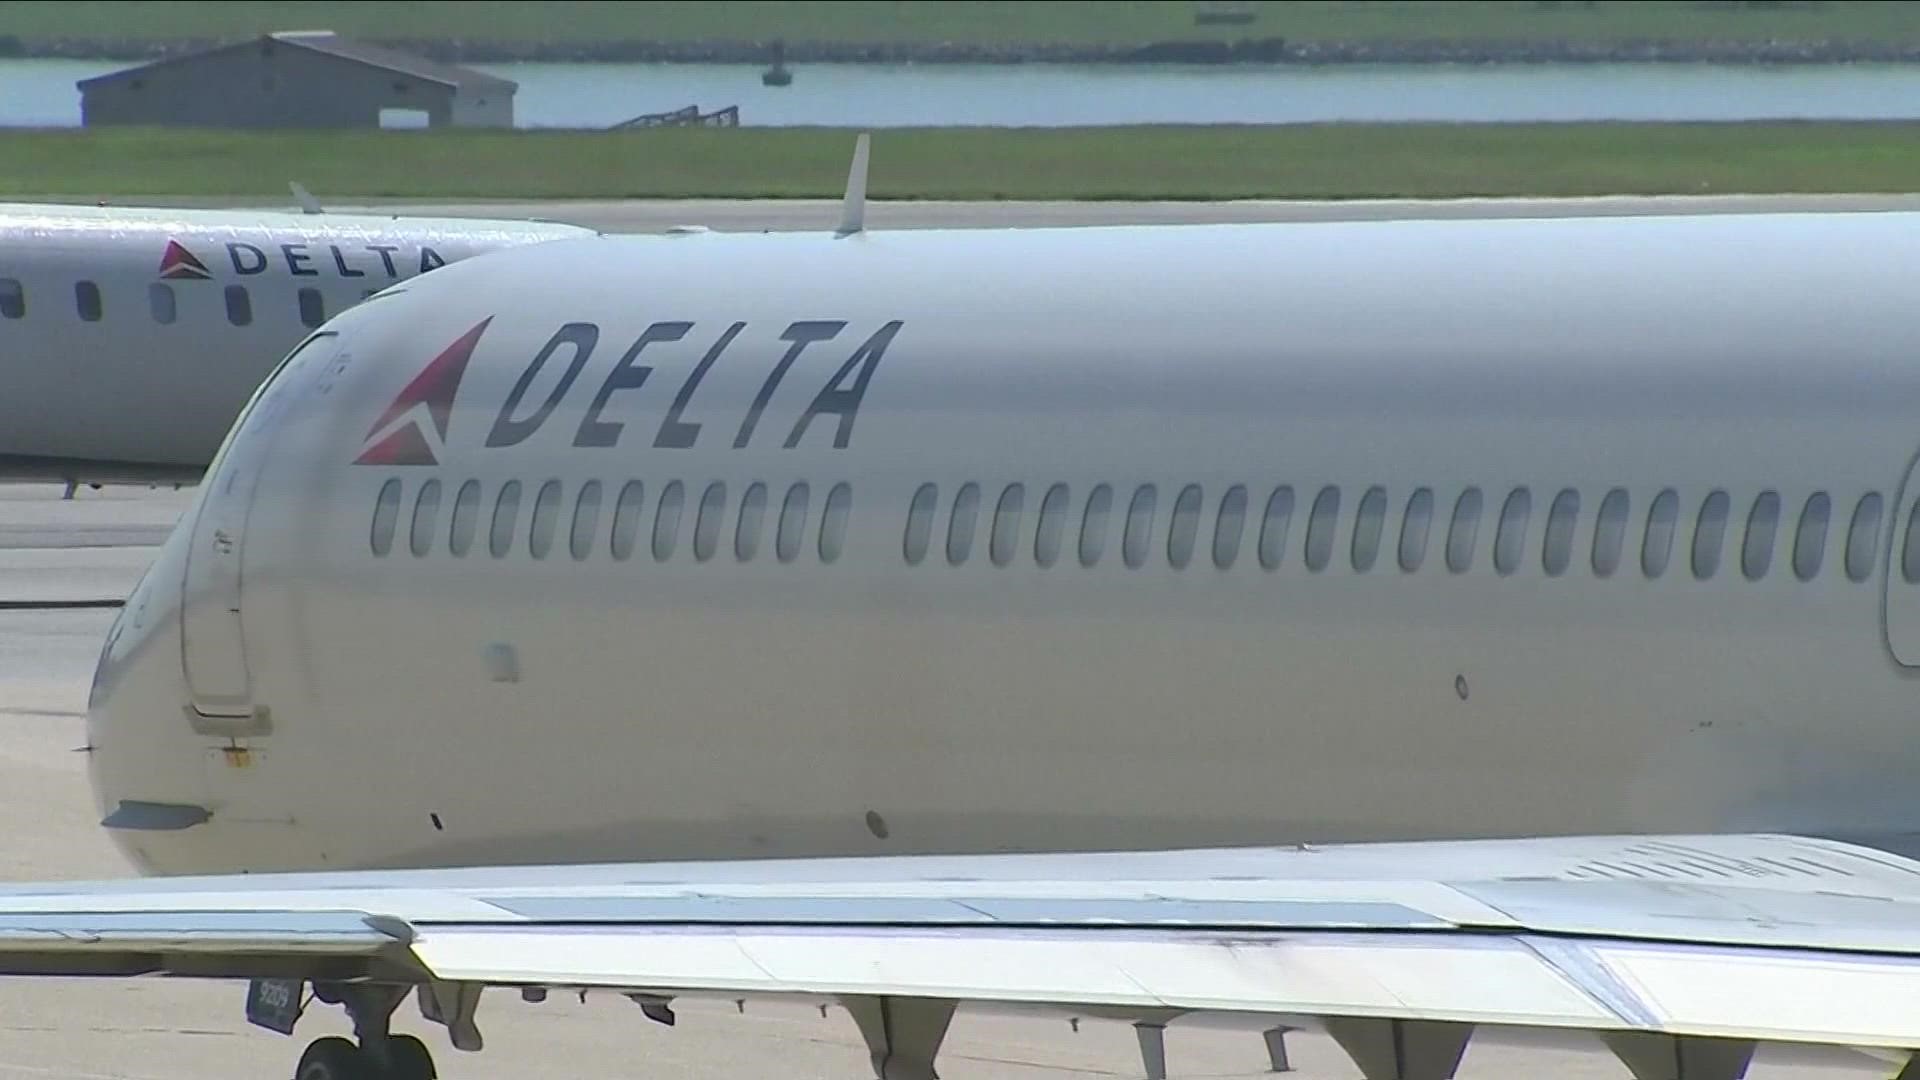 Buffalo ranked 5th in flight cancellations